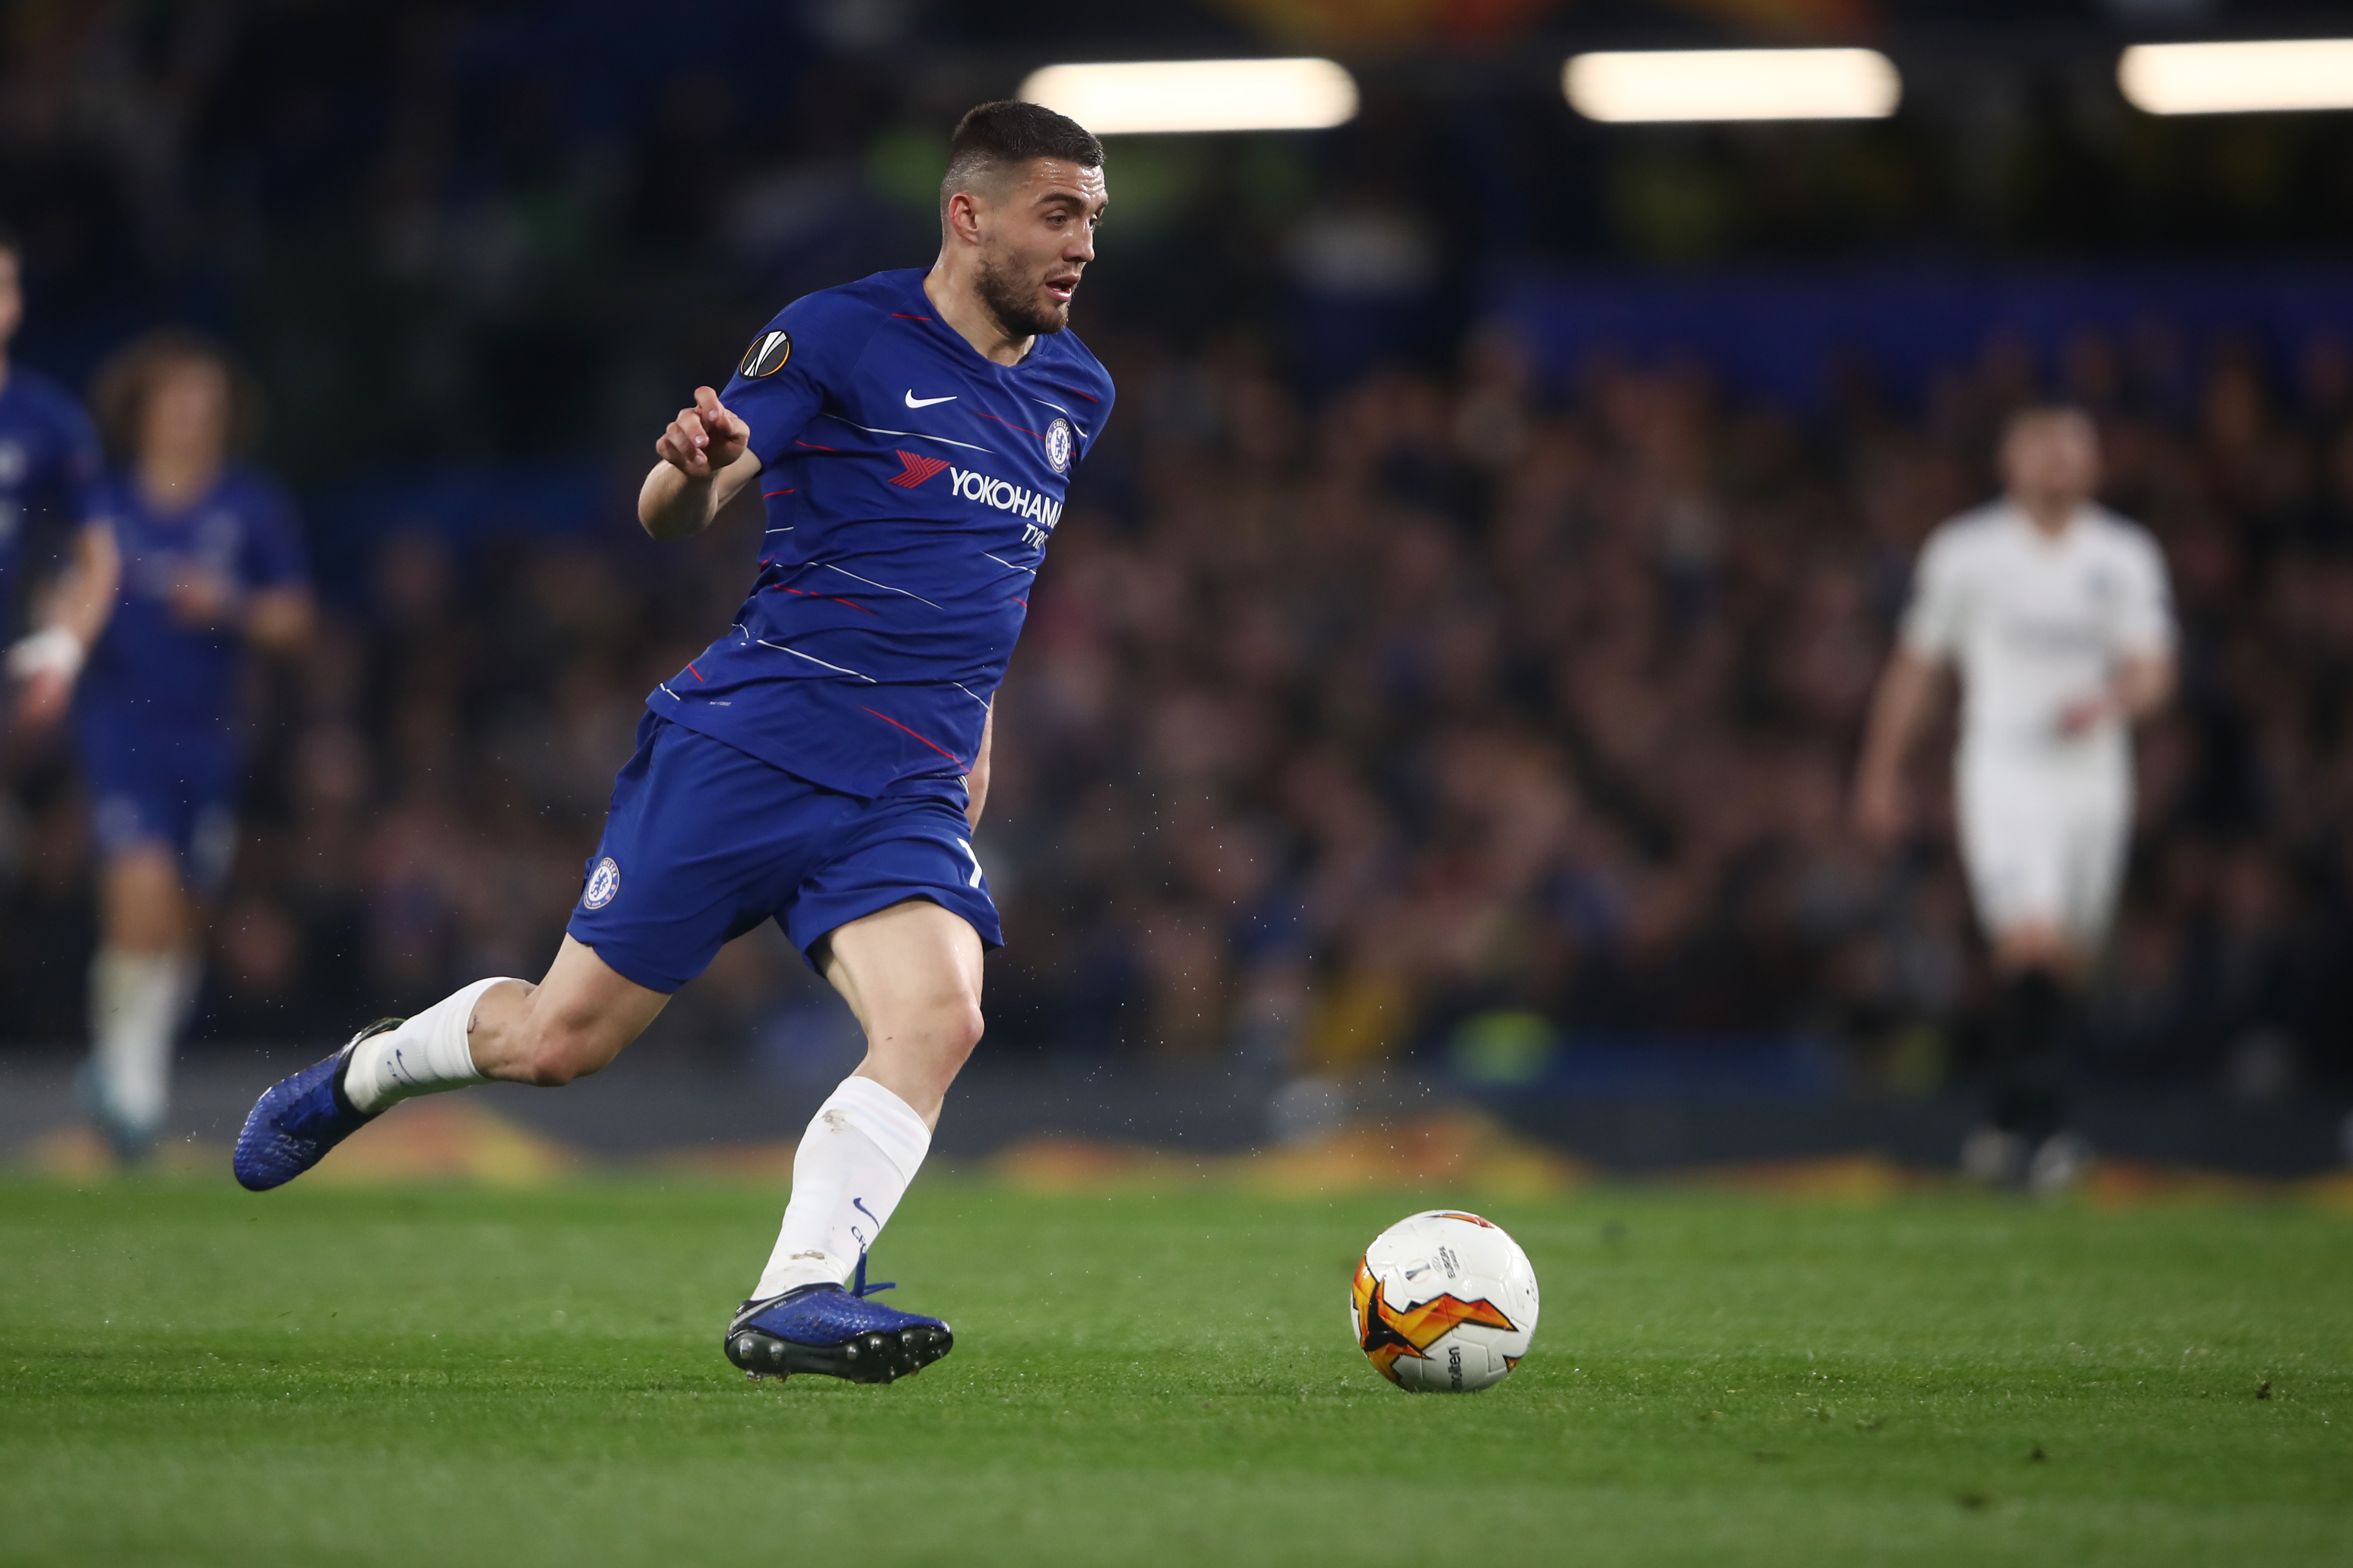 LONDON, ENGLAND - MAY 09: Mateo Kovacic of Chelsea controls the ball during the UEFA Europa League Semi Final Second Leg match between Chelsea and Eintracht Frankfurt at Stamford Bridge on May 09, 2019 in London, England. (Photo by Alex Grimm/Bongarts/Getty Images)